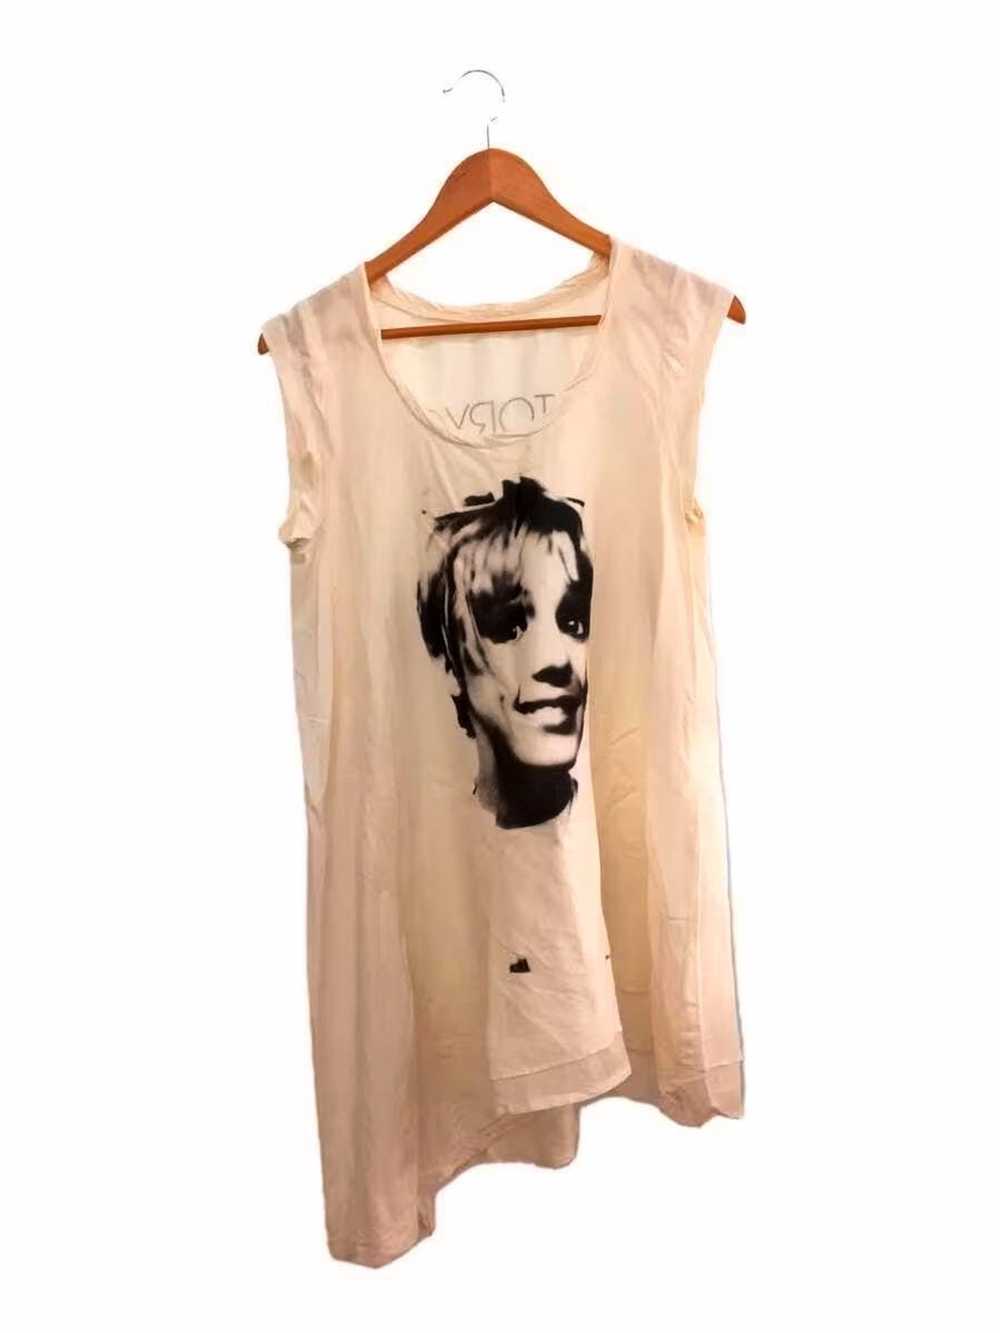 Hysteric Glamour "FACTORYGIRL" Tank Top - image 1